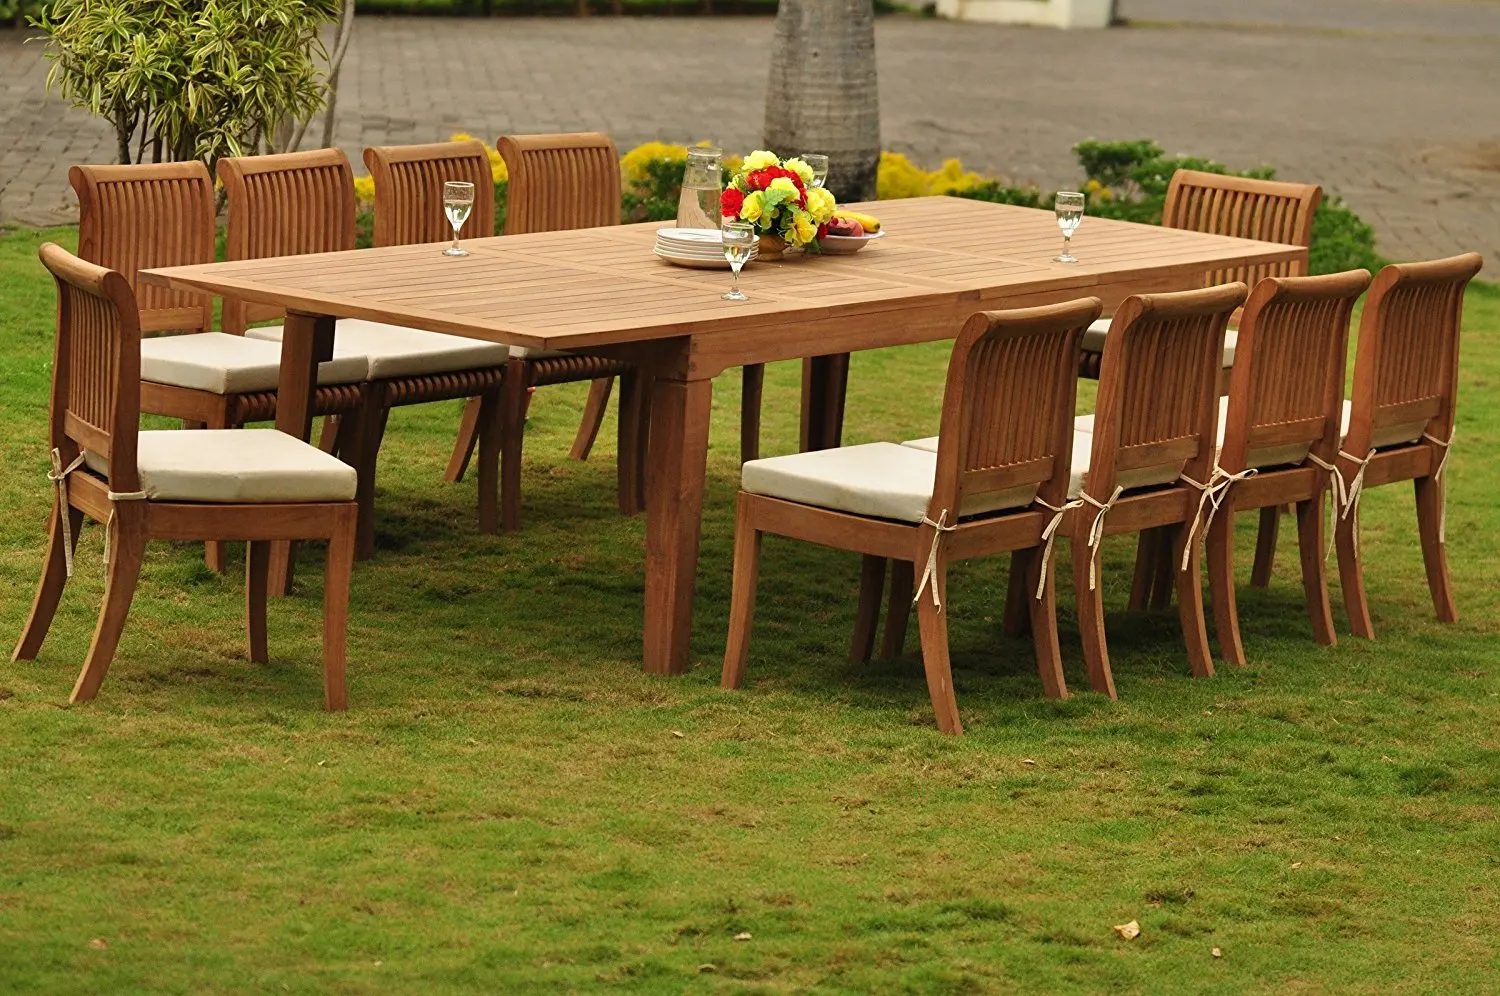 Cheap 10 Seater Dining Table, find 10 Seater Dining Table deals on line